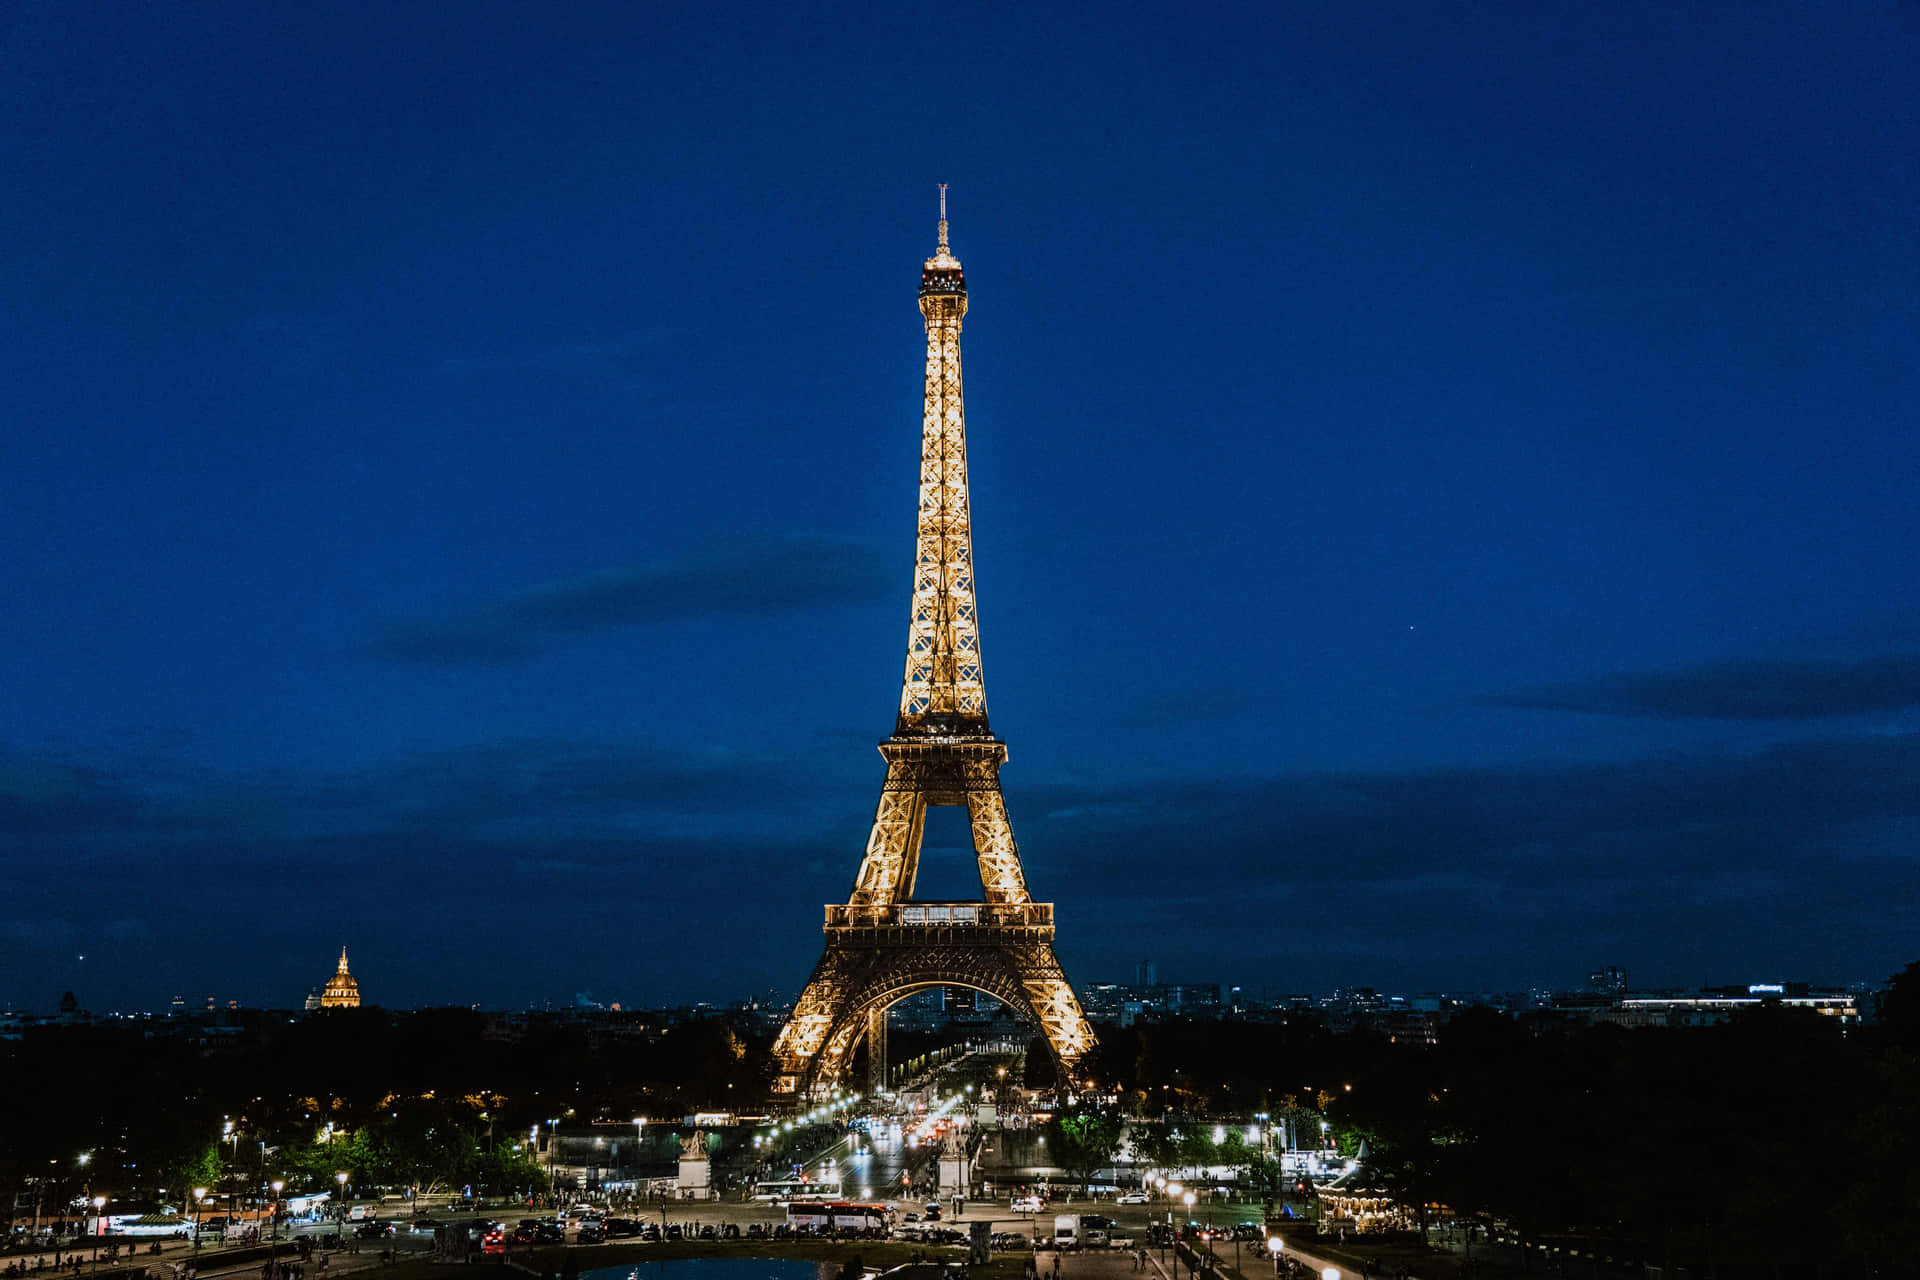 The Eiffel Tower Is Lit Up At Night